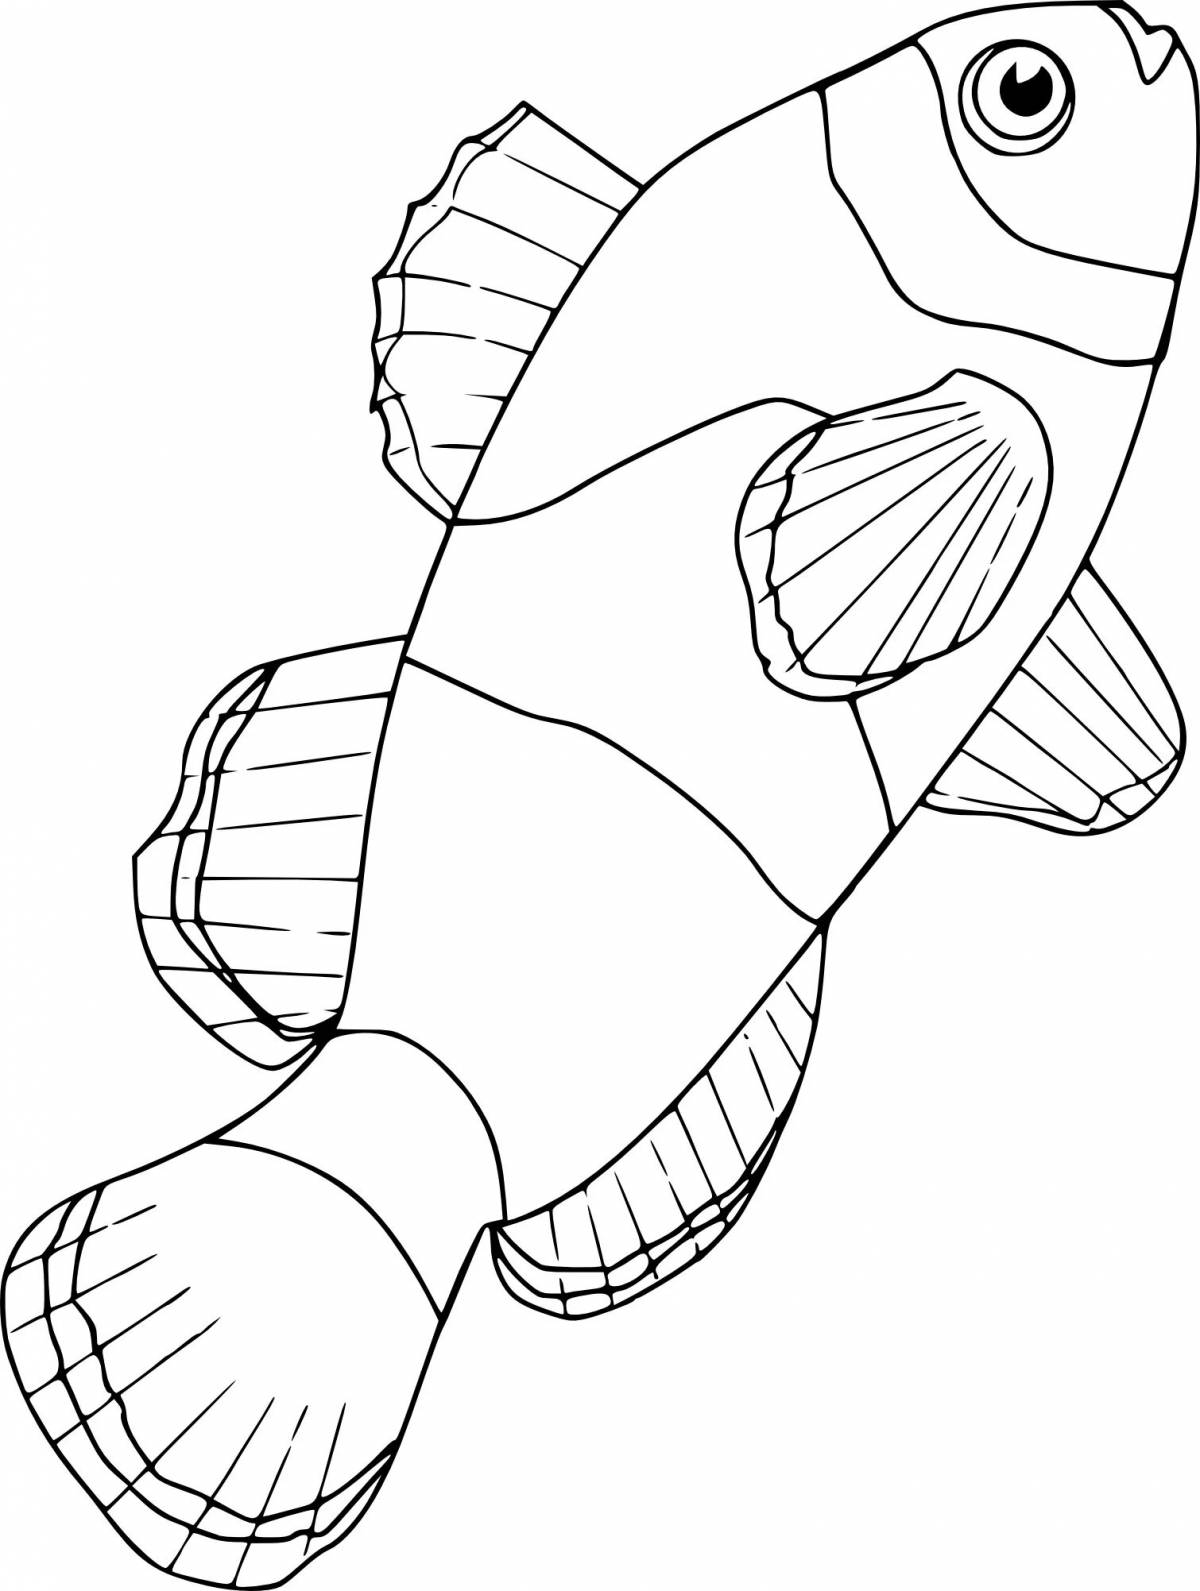 Coloring page graceful fish